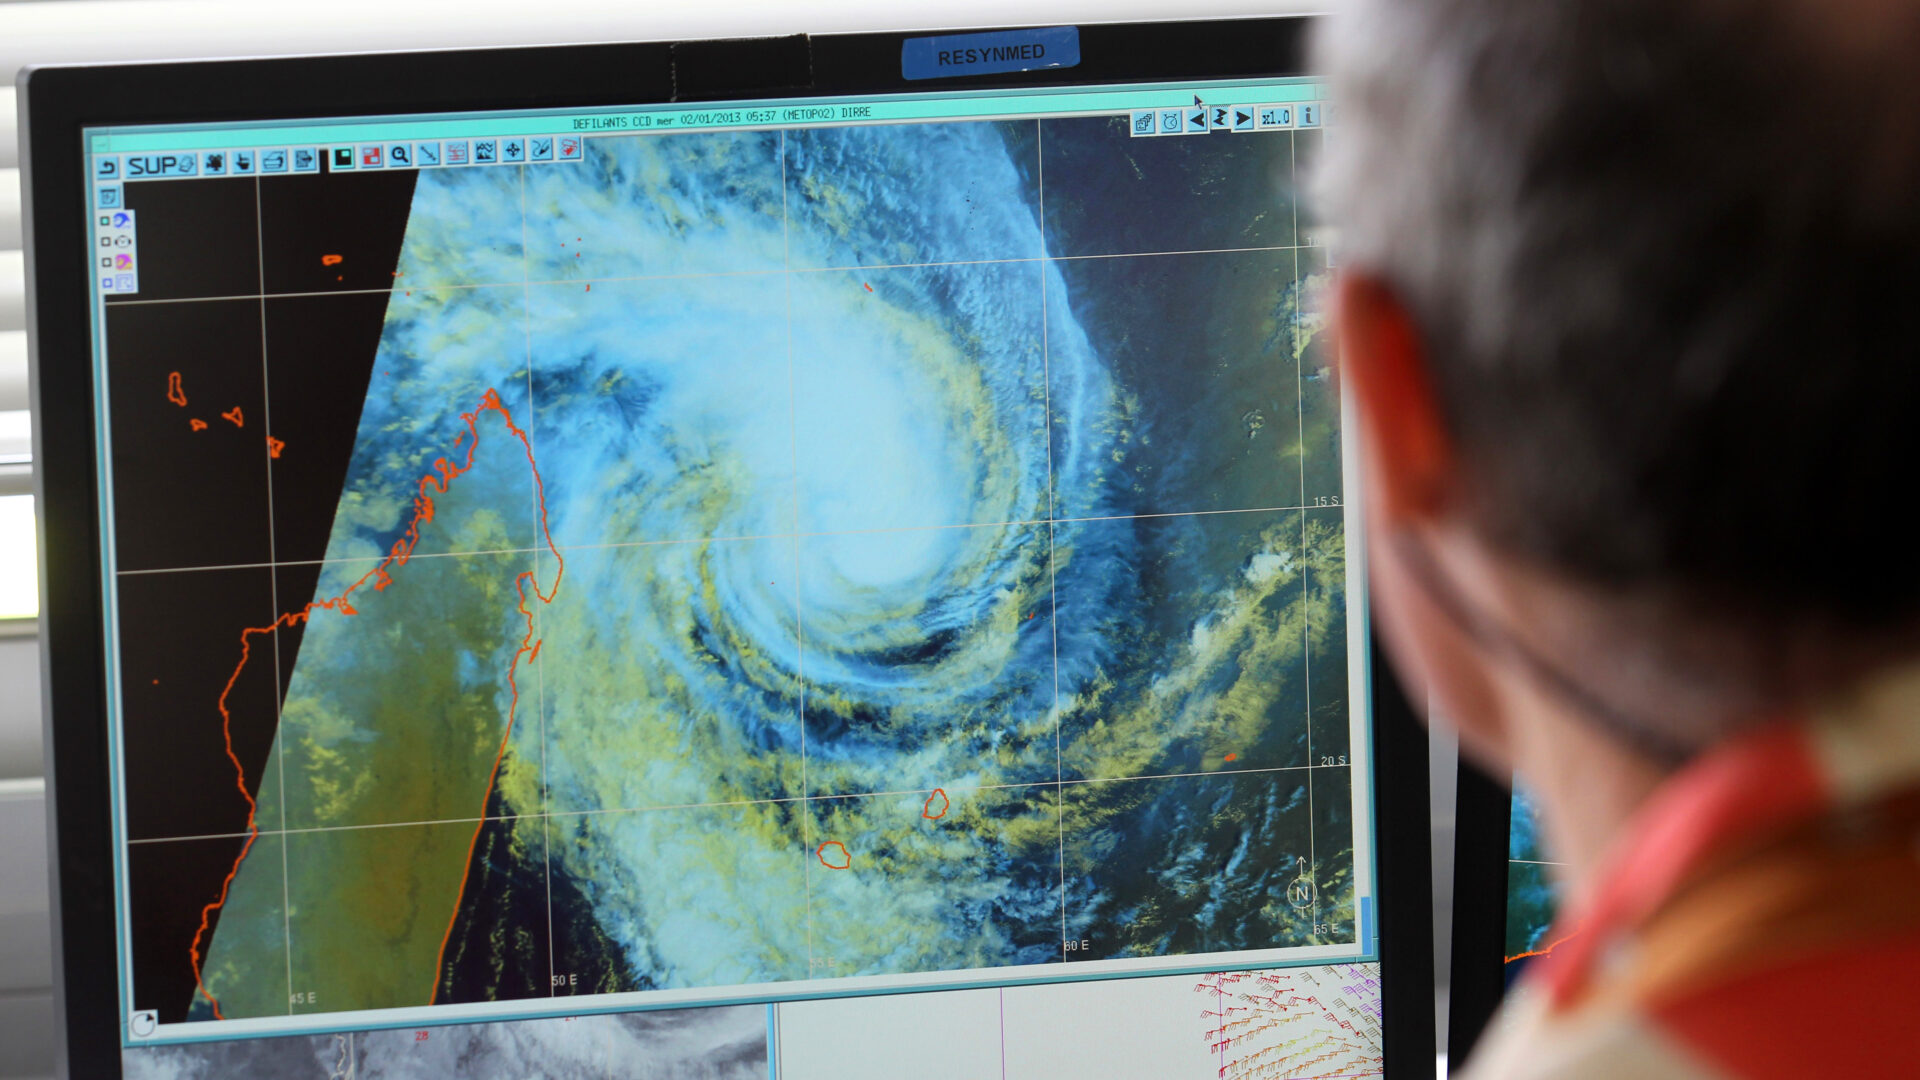 A man looks at a digitized rendering of a cyclone on a computer screen.